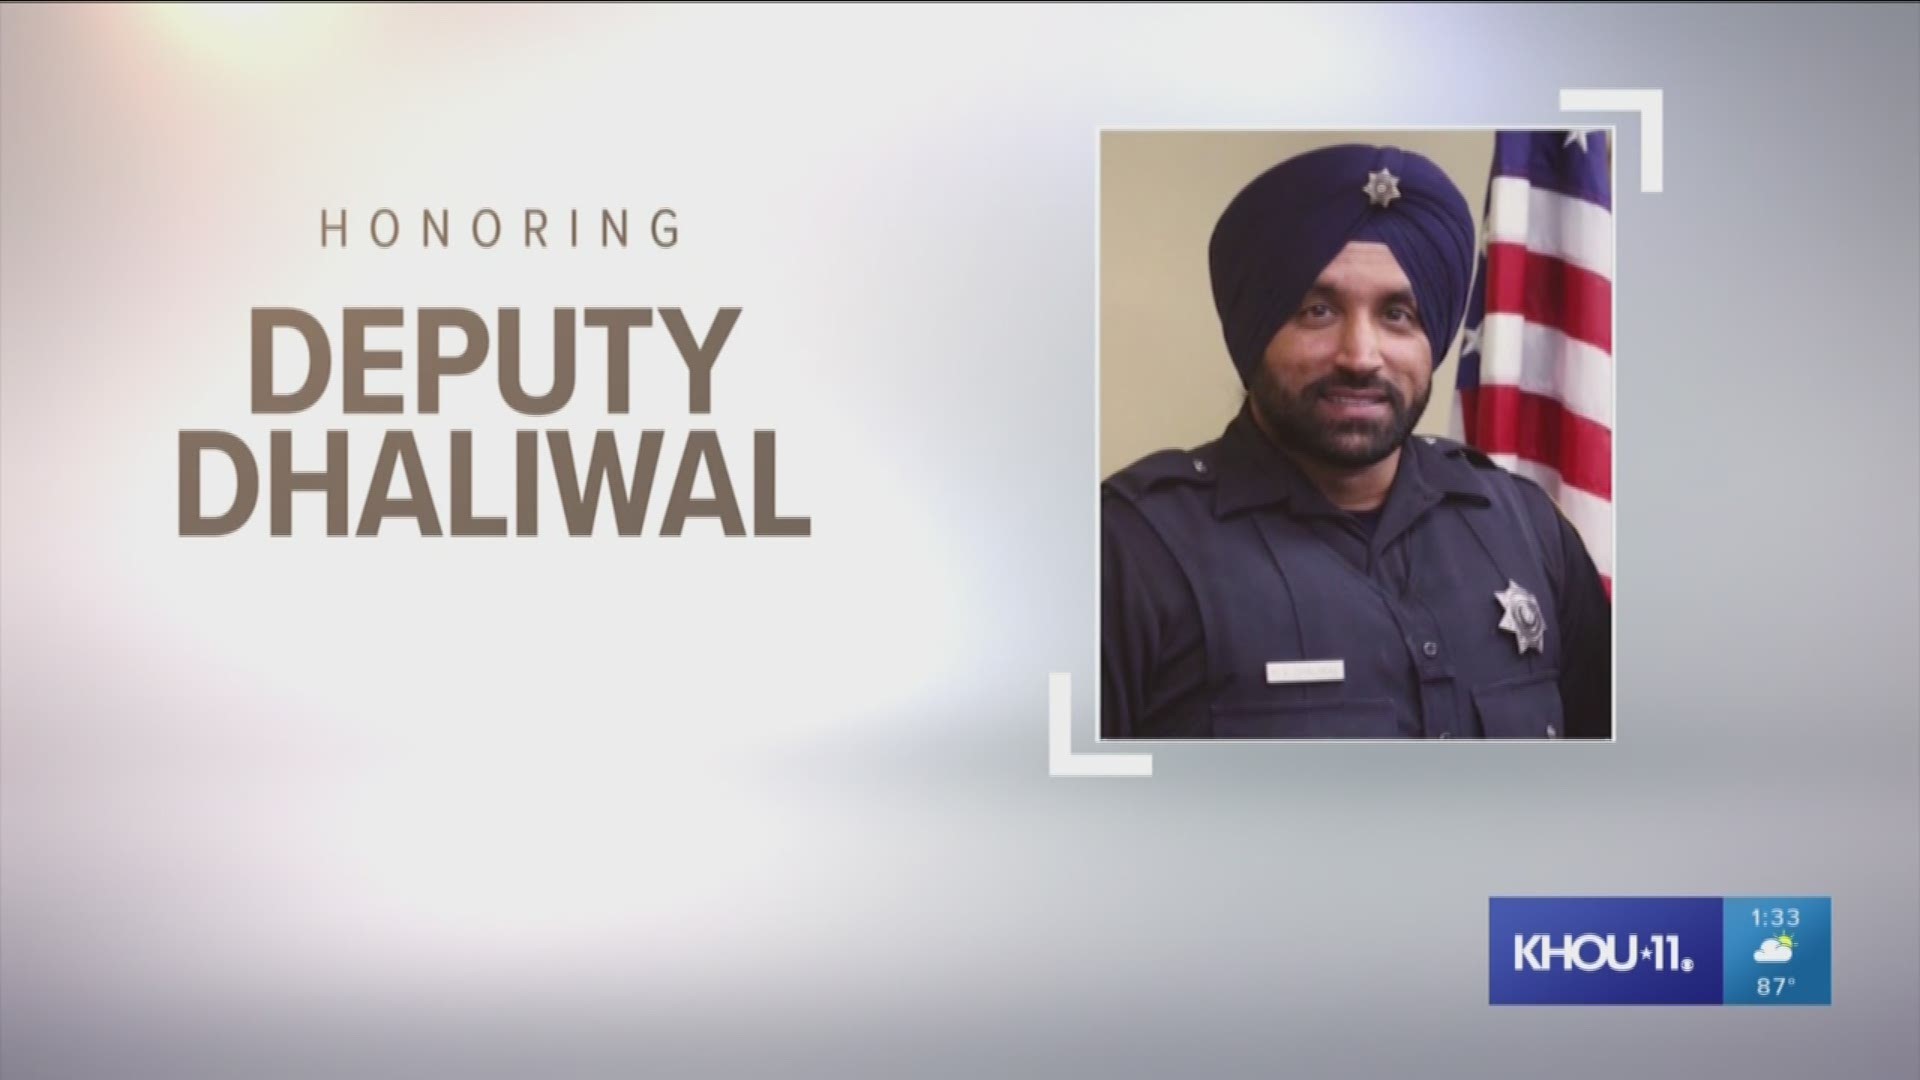 After two services and an End of Watch ceremony, here is a final tribute to Deputy Sandeep Dhaliwal.